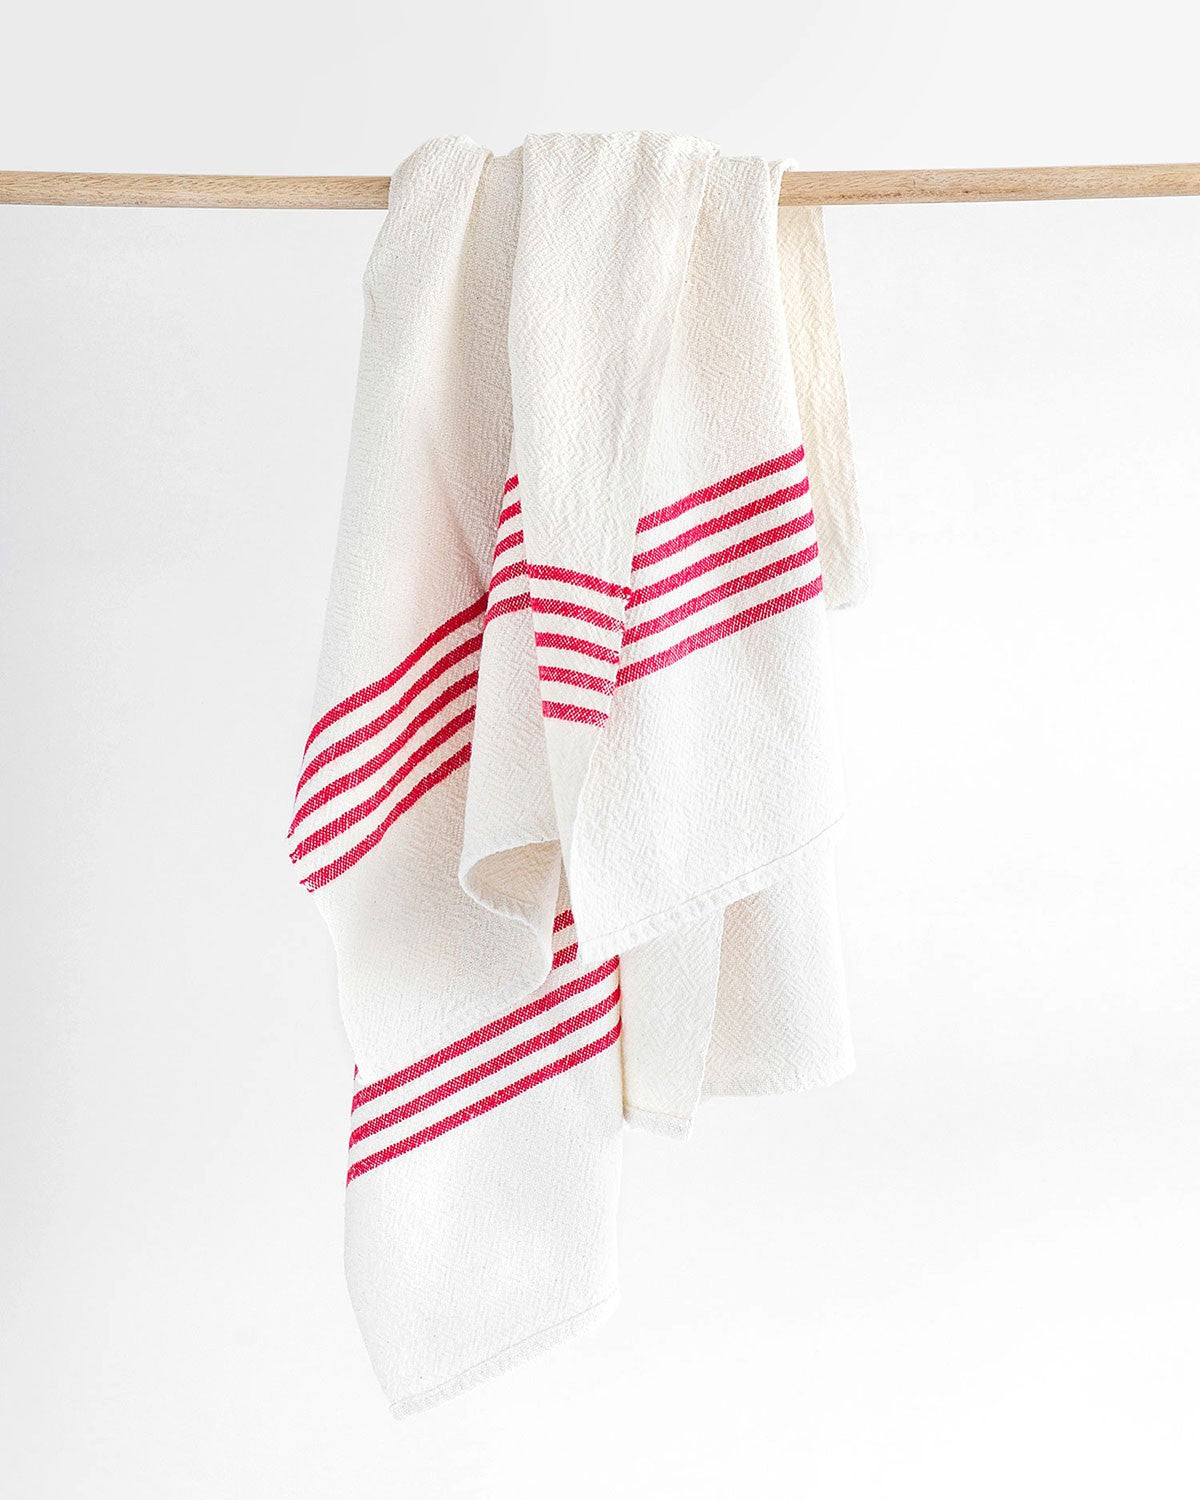 Towels_BathTowel_BeachTowel_Contemporary_Handwoven_Striped_Red